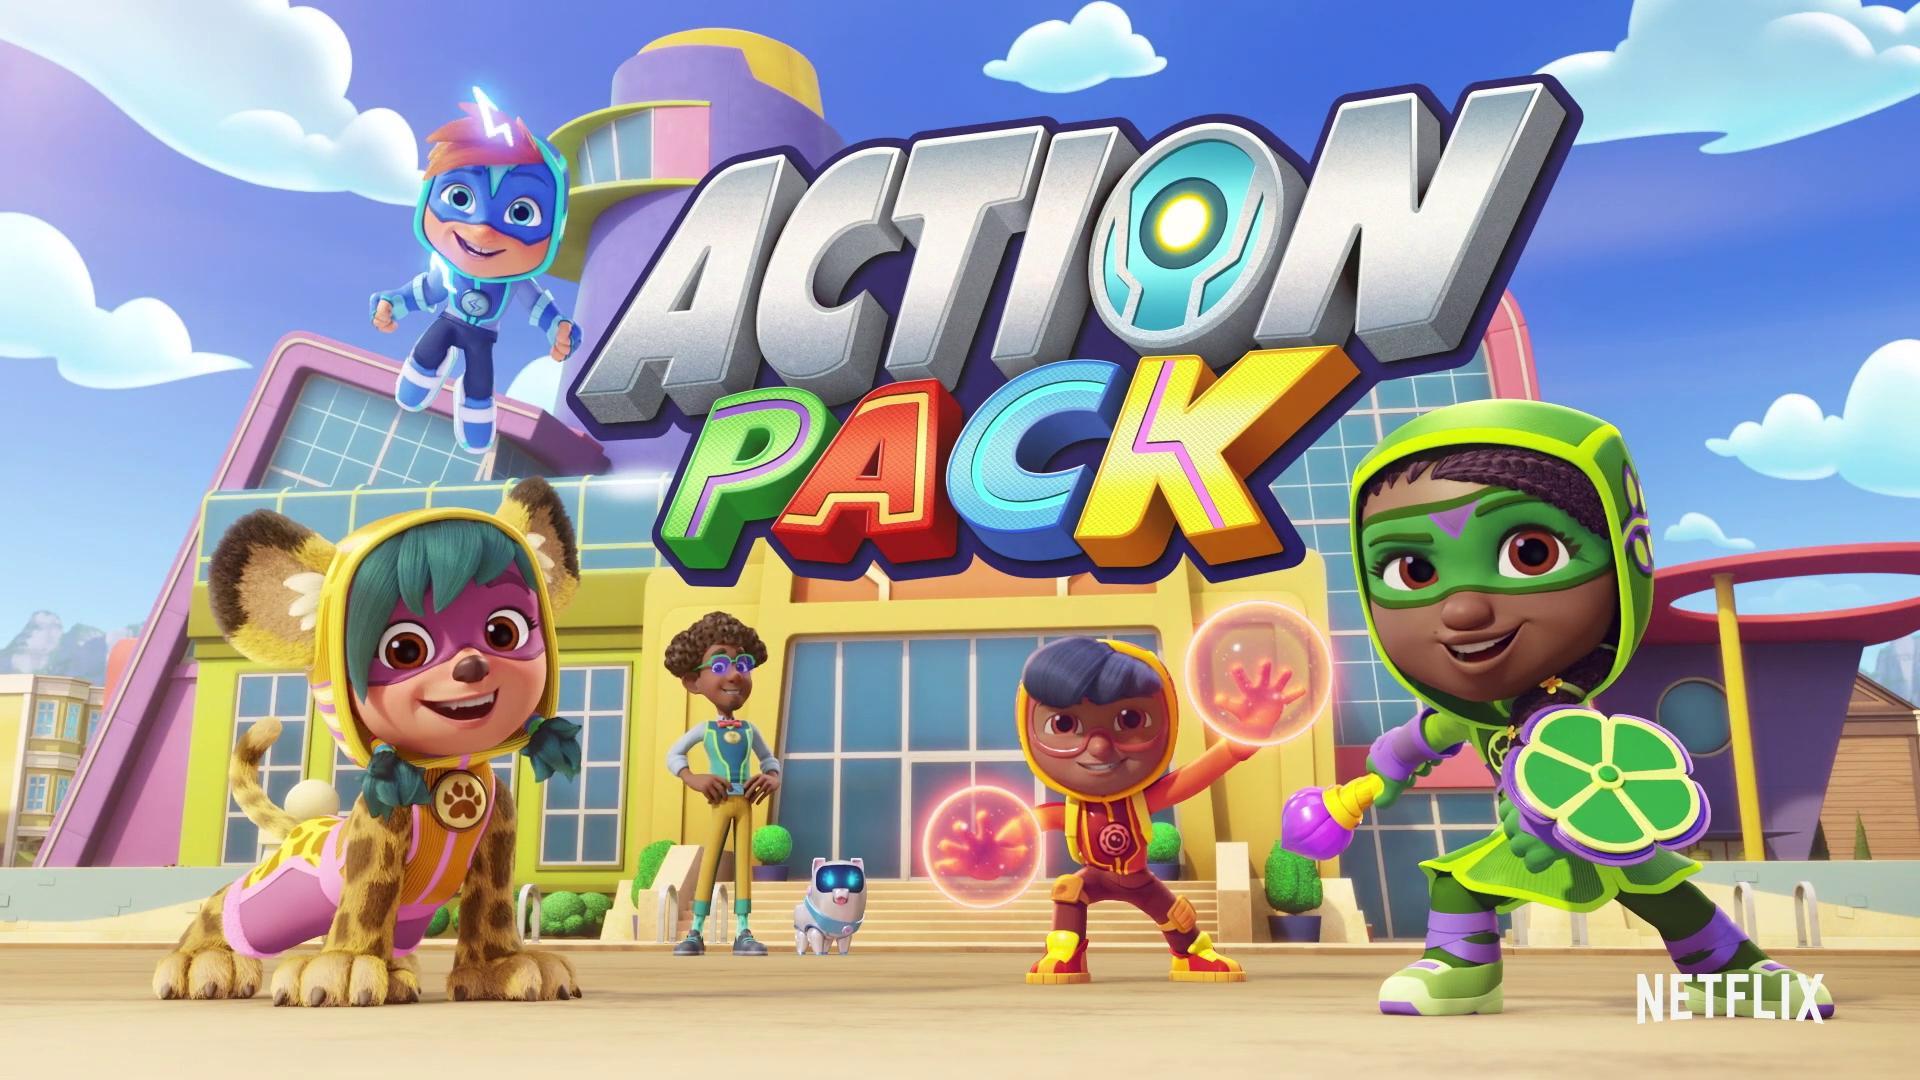 Action Pack (2022)